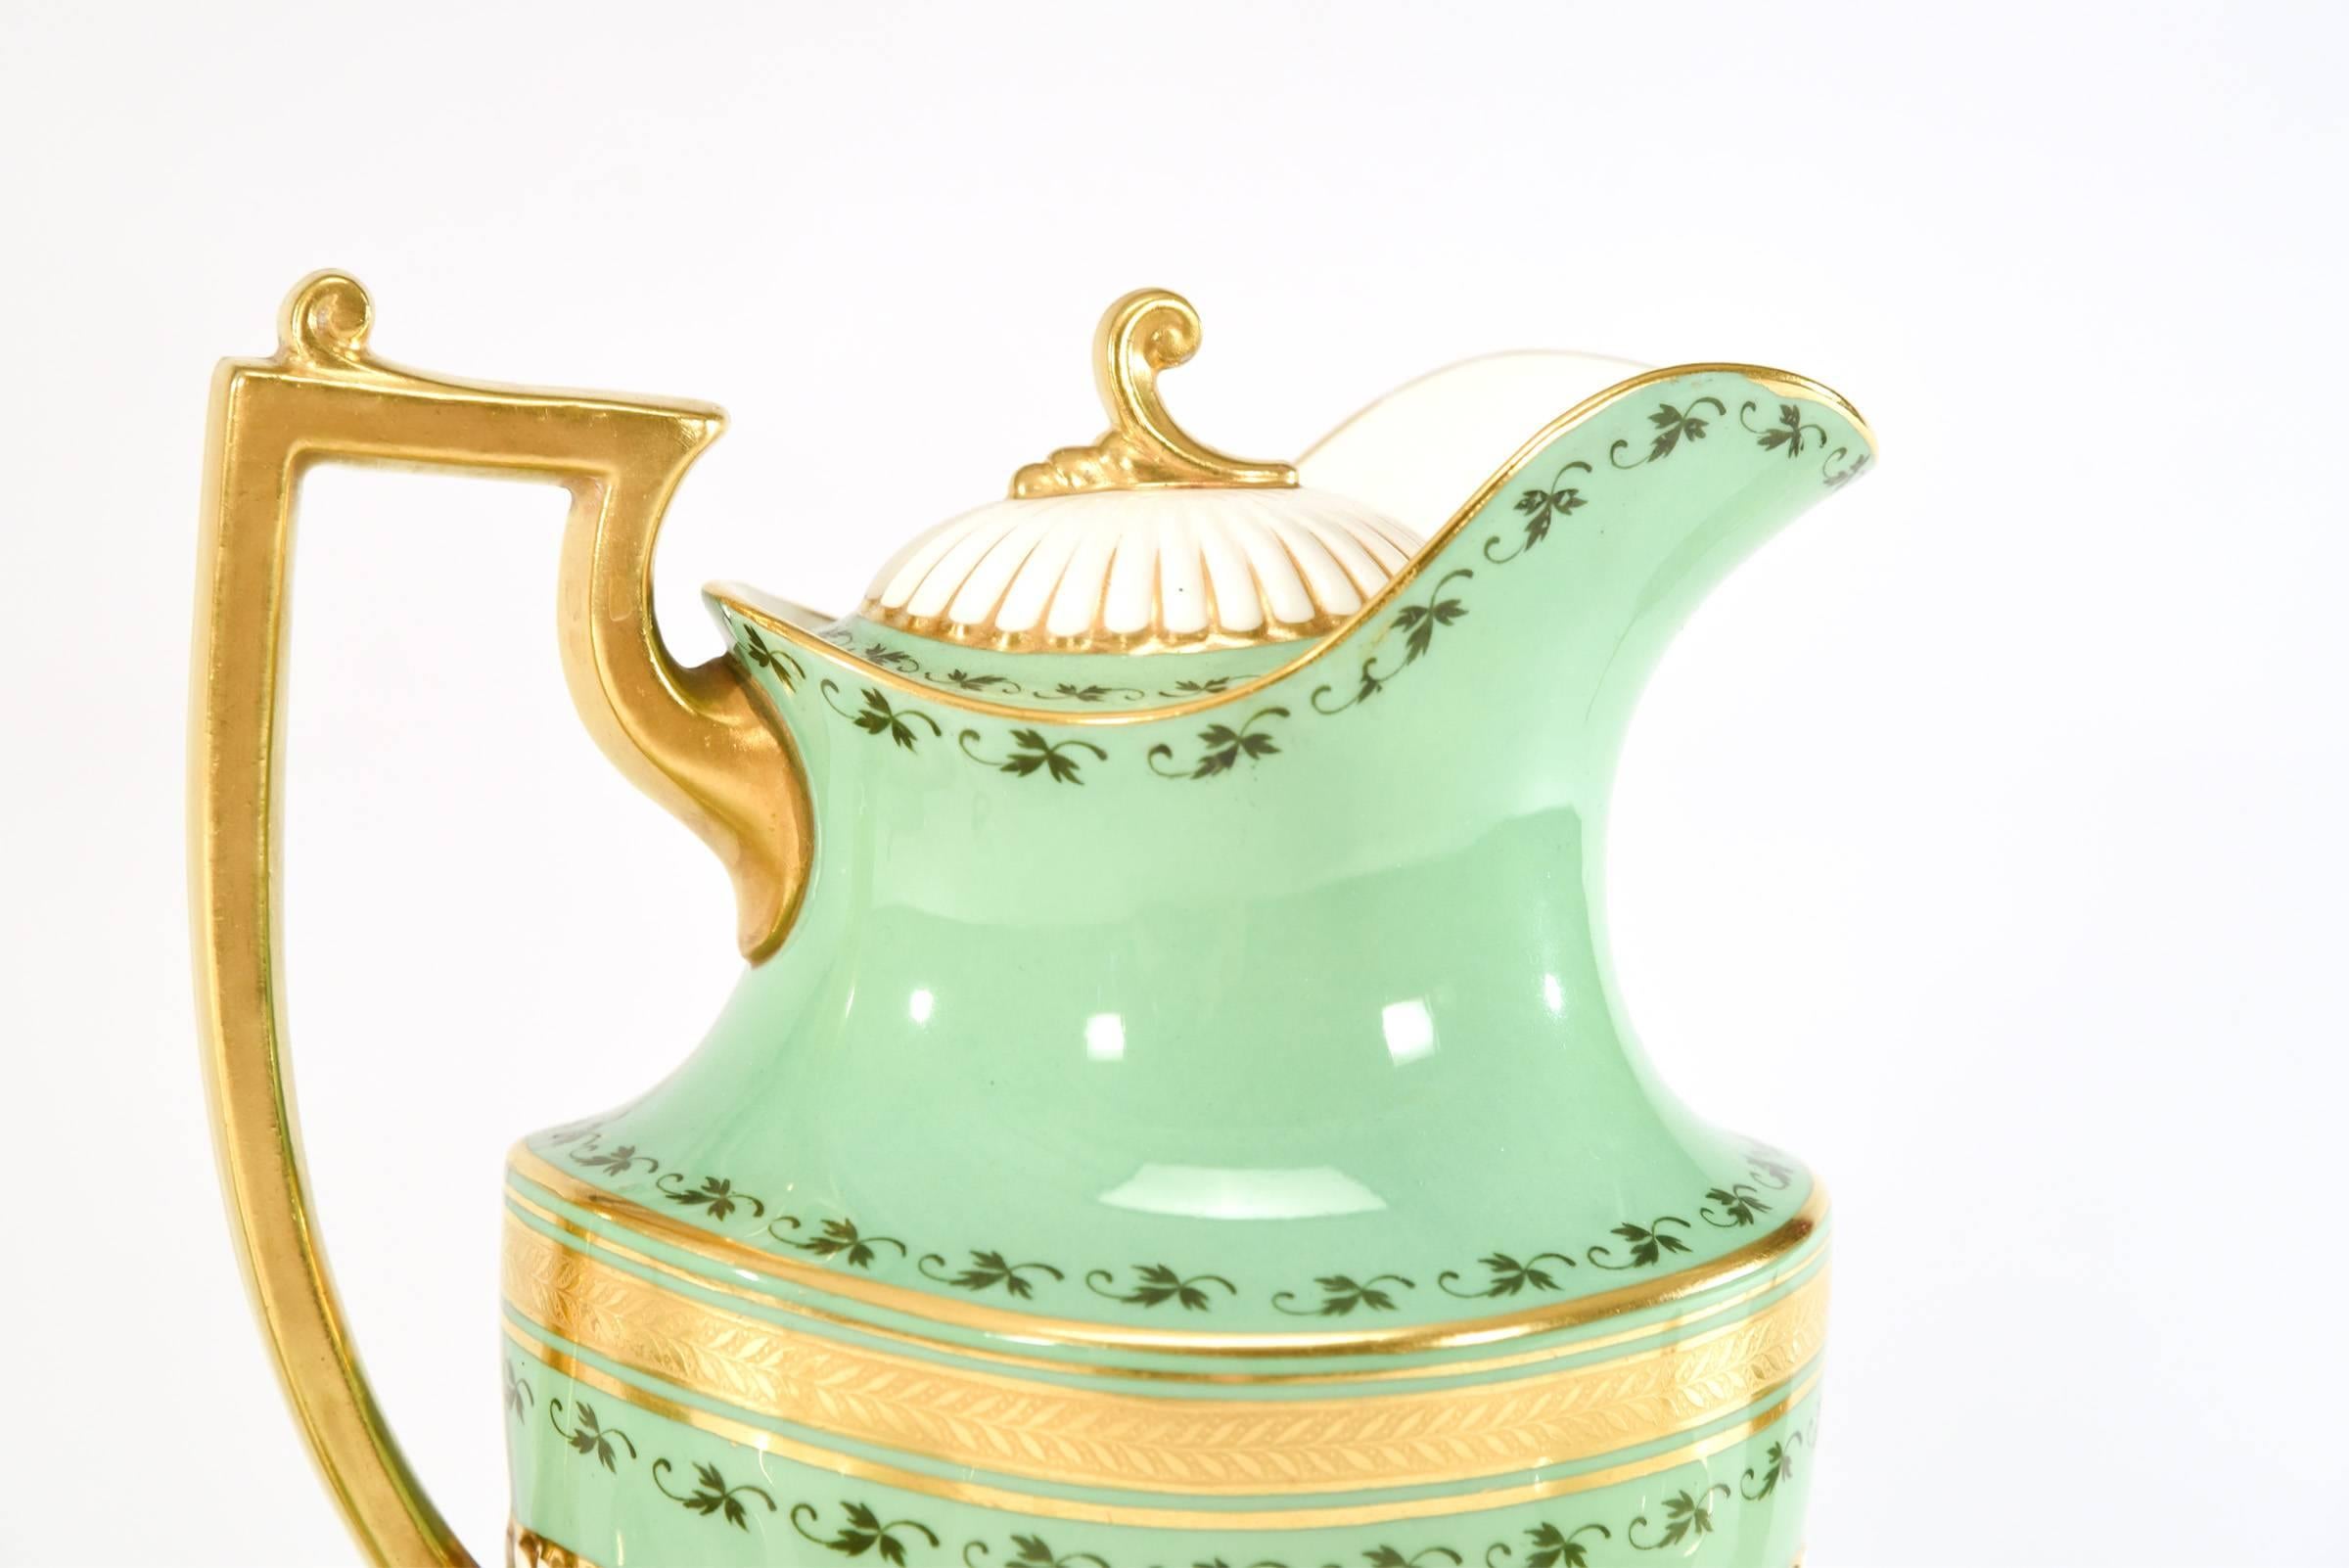 This is a rare shape and specialized set that features beautiful cups with stylized handles unique to hot chocolate cups. Chocolate was a rare and expensive commodity that was very thick and viscous thus the short spout.
The elegant handle added to